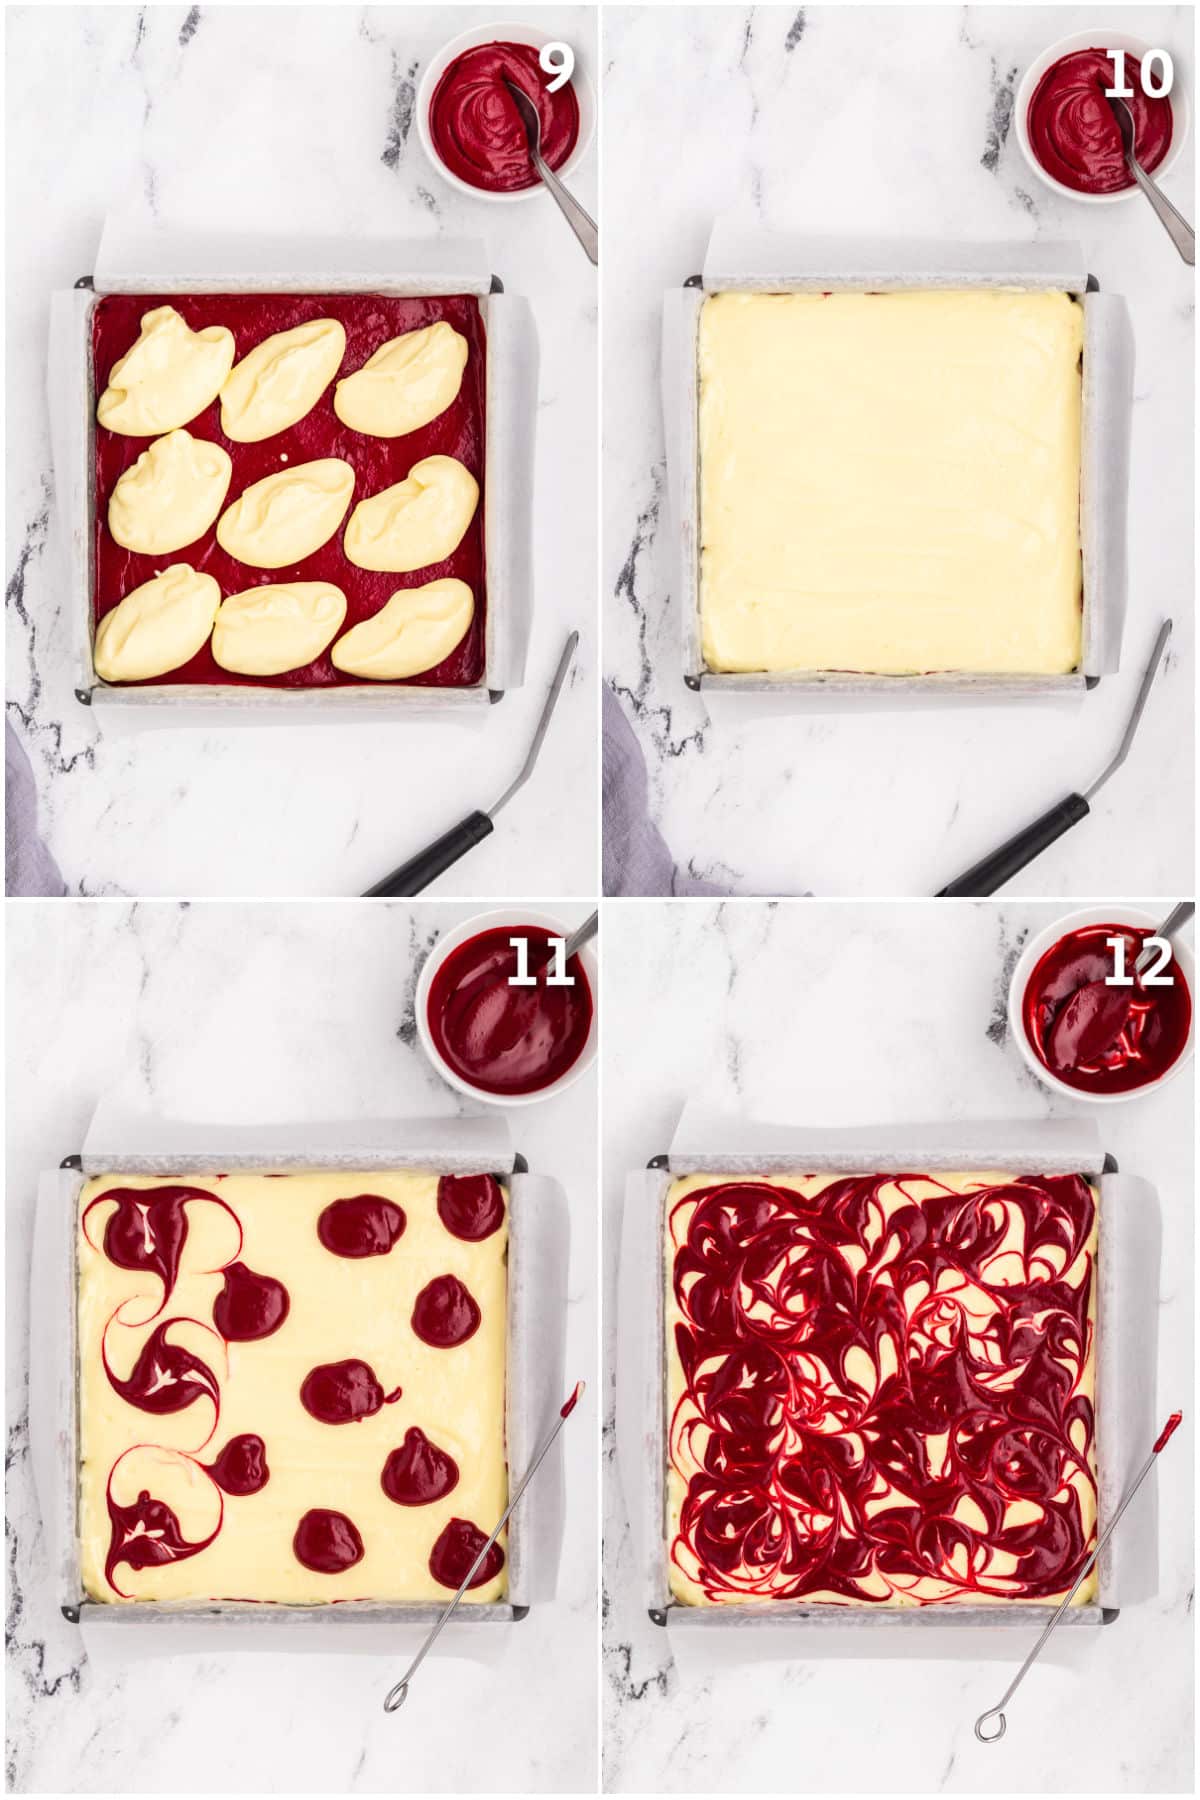 Cheesecake being spread over and swirled into a pan of red velvet bars.